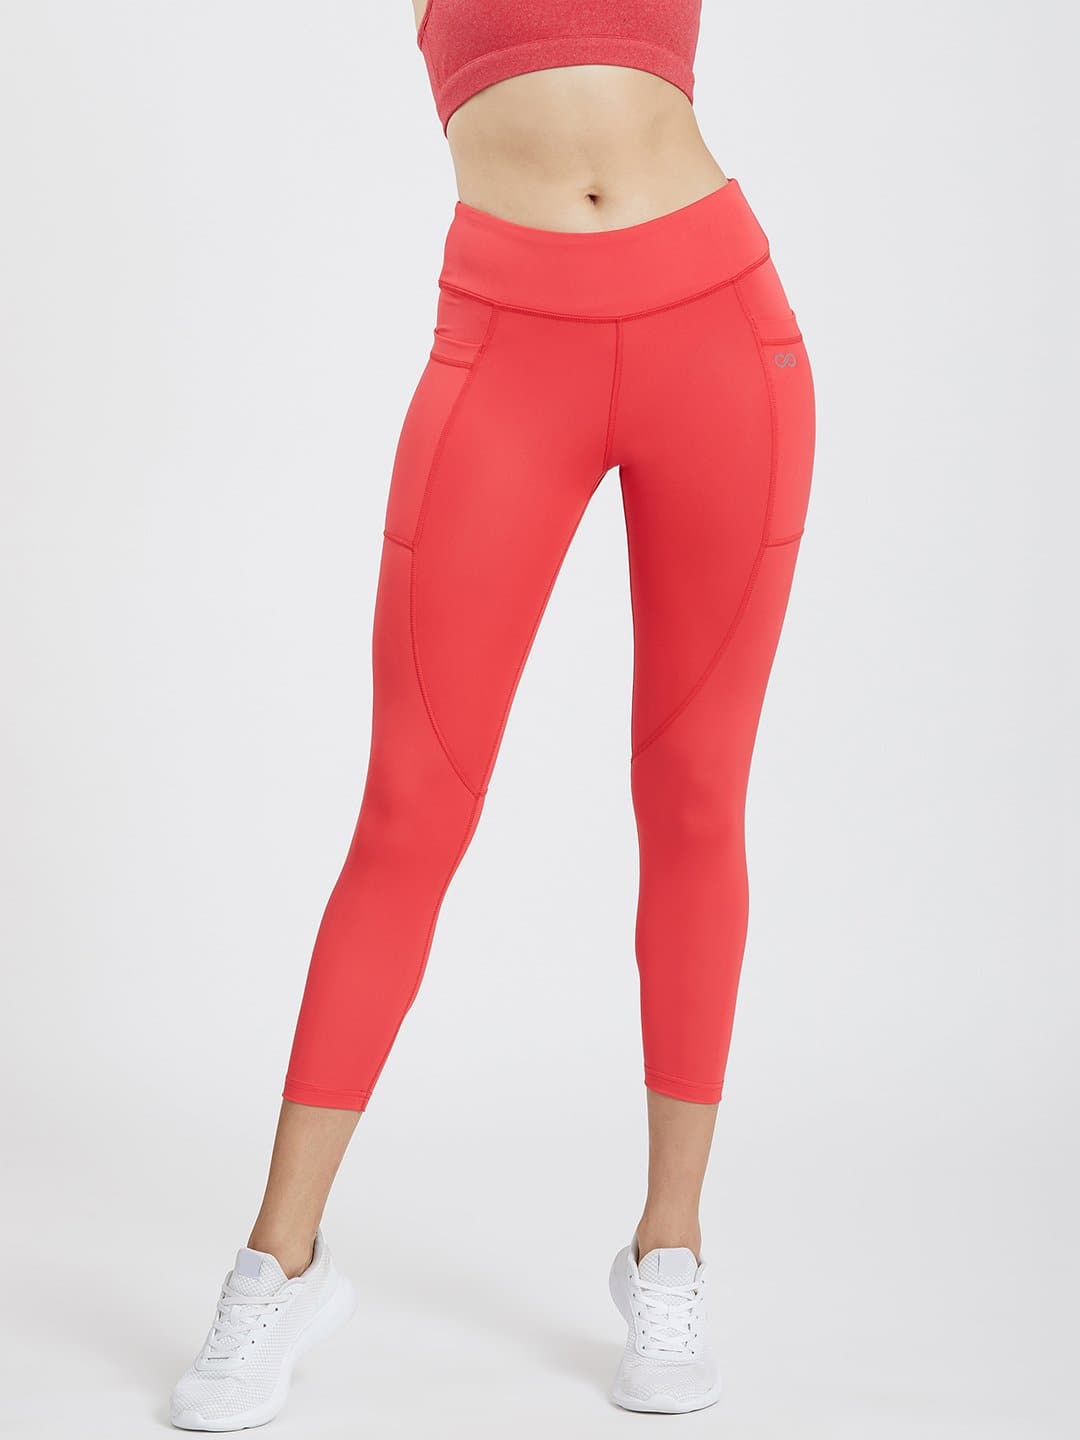 Maxtreme Power me Flame Red Ankle Pocket Women's Leggings